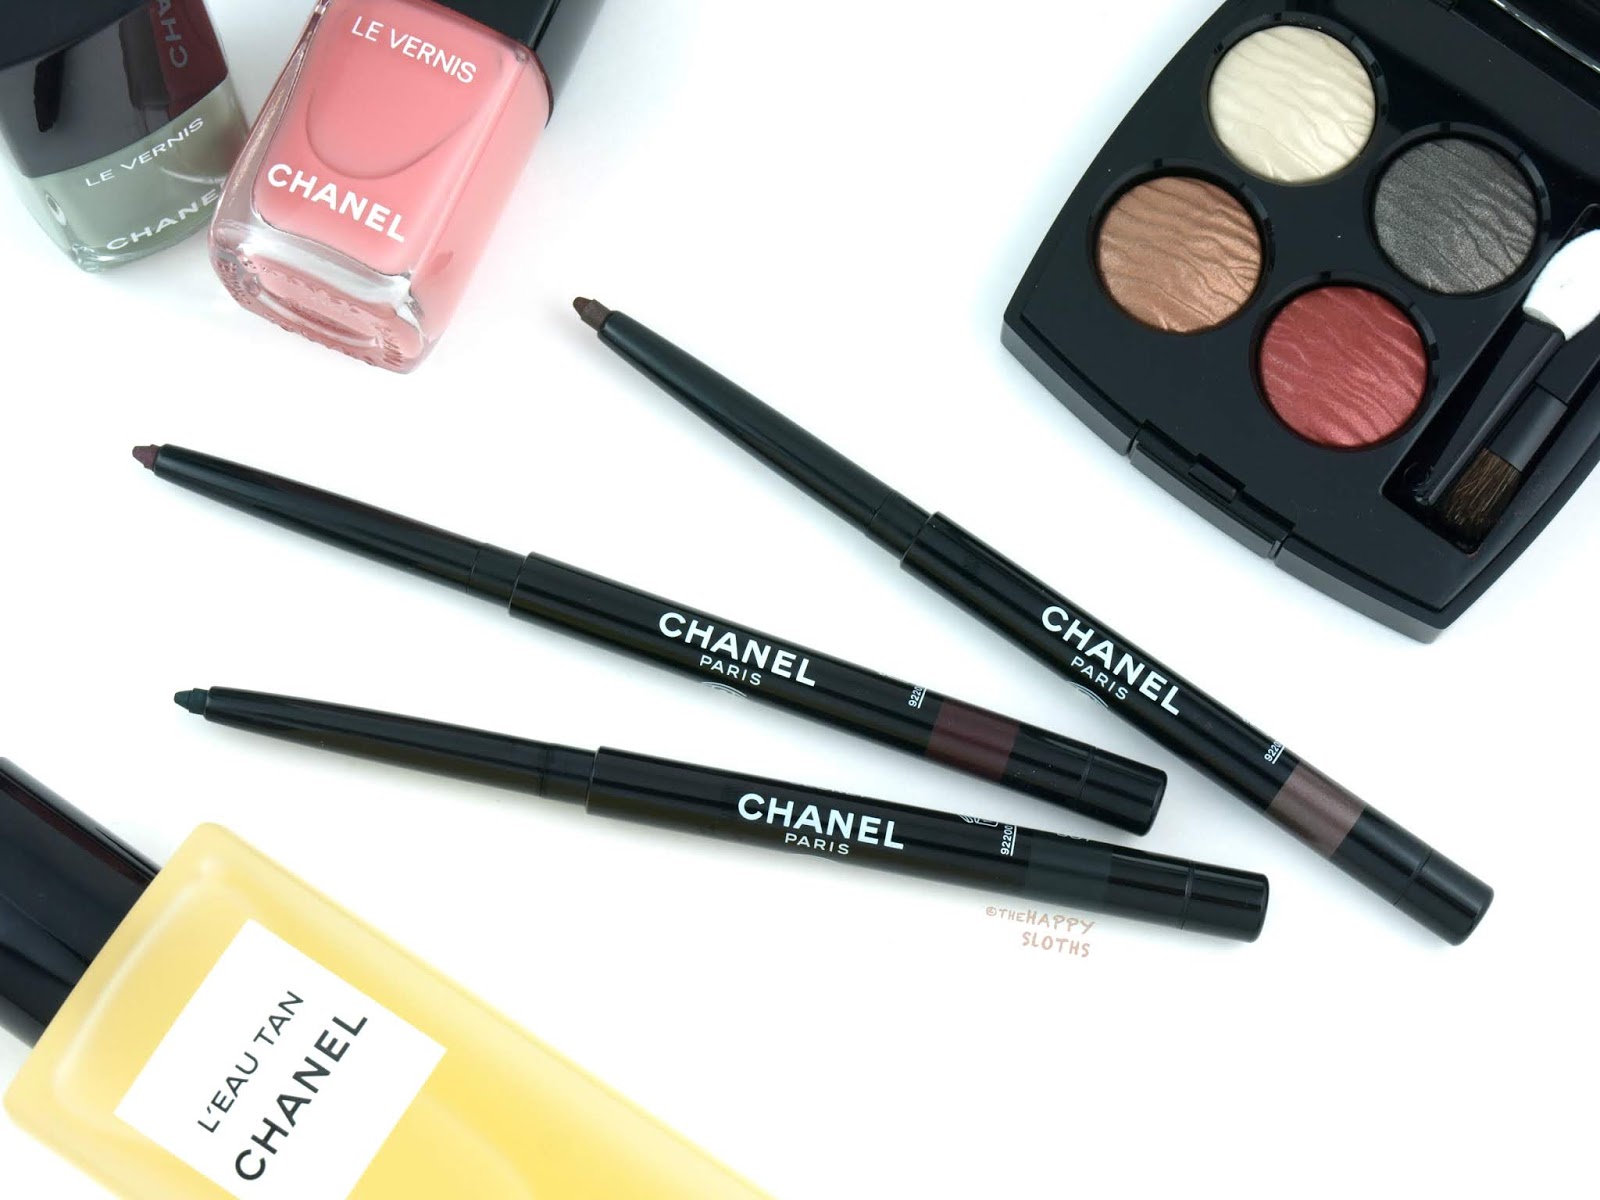 Chanel Cruise 2018 | Stylo Yeux Waterproof Eyeliner in "867 Secret", "887 Charme", "897 Revelation": Review and Swatches